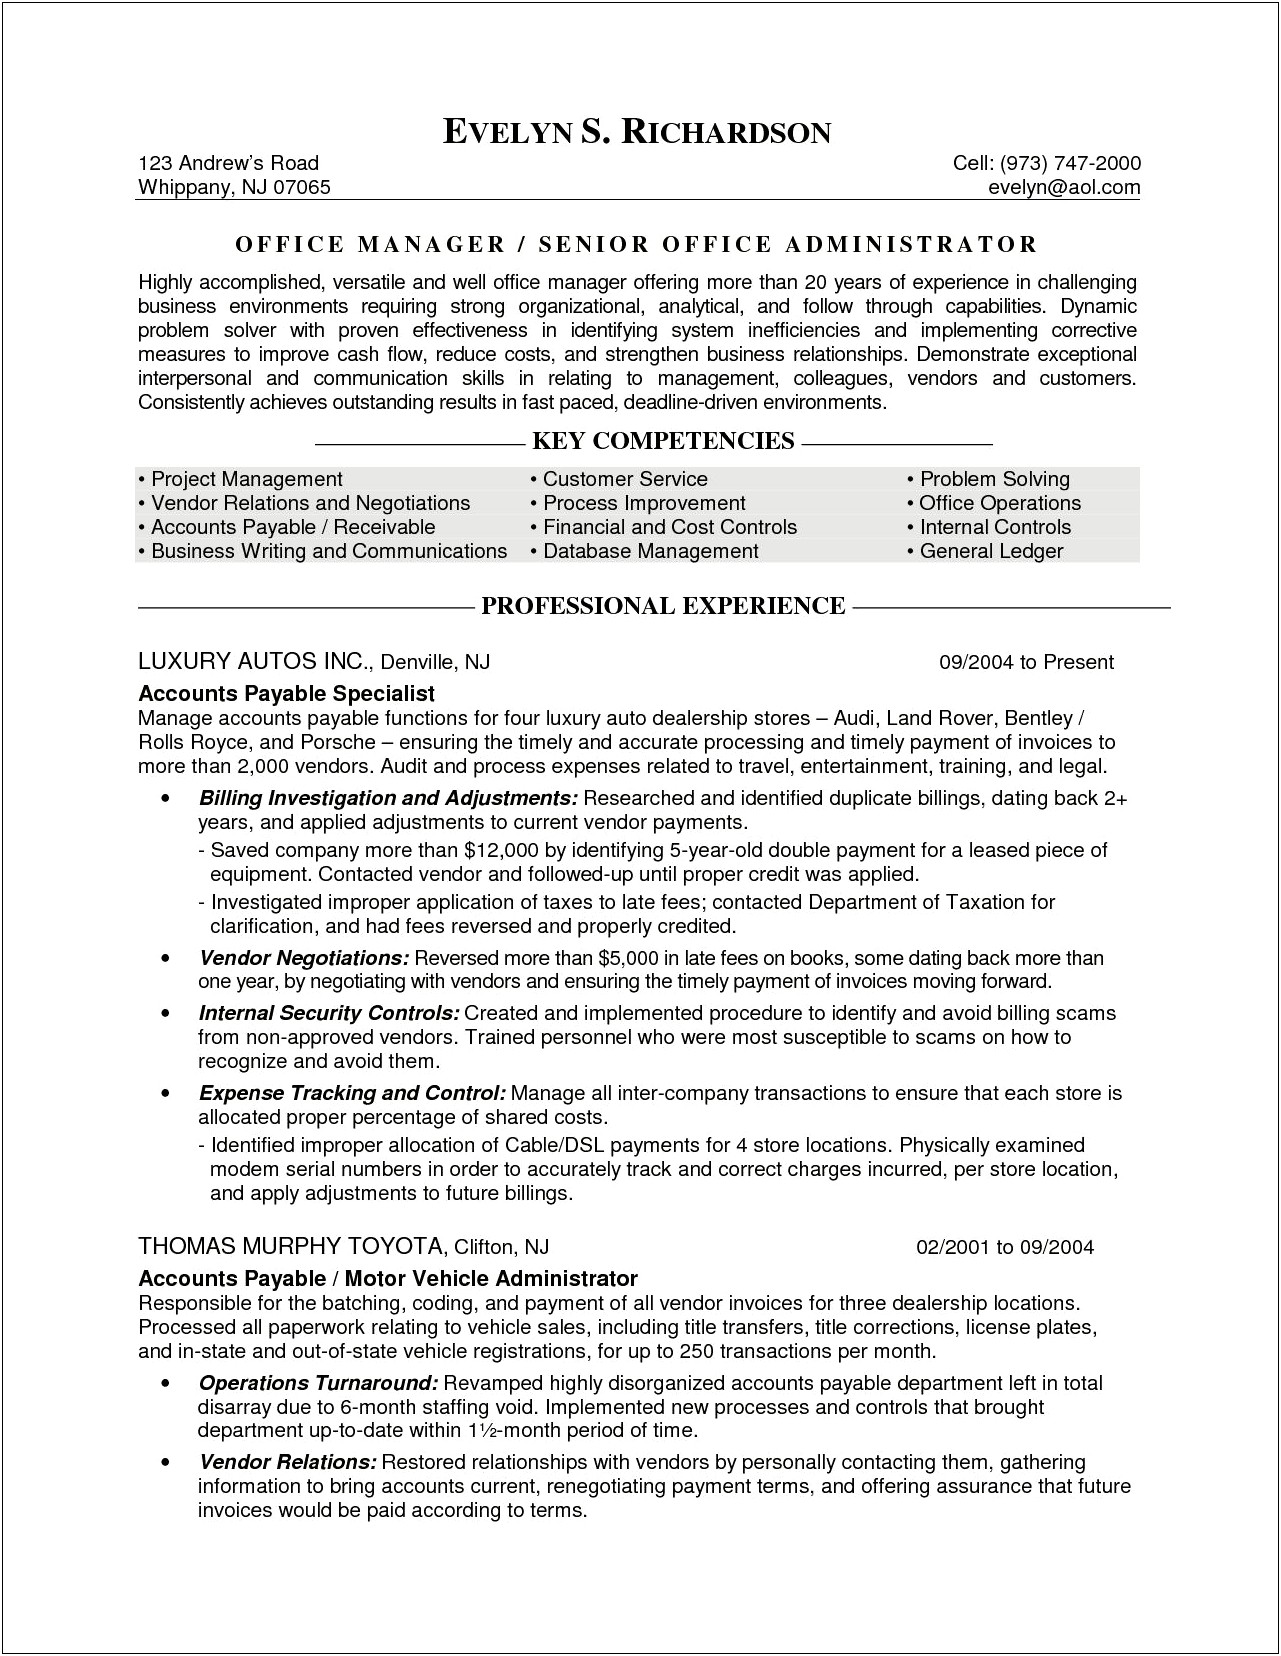 Office Manager Customer Service Resume